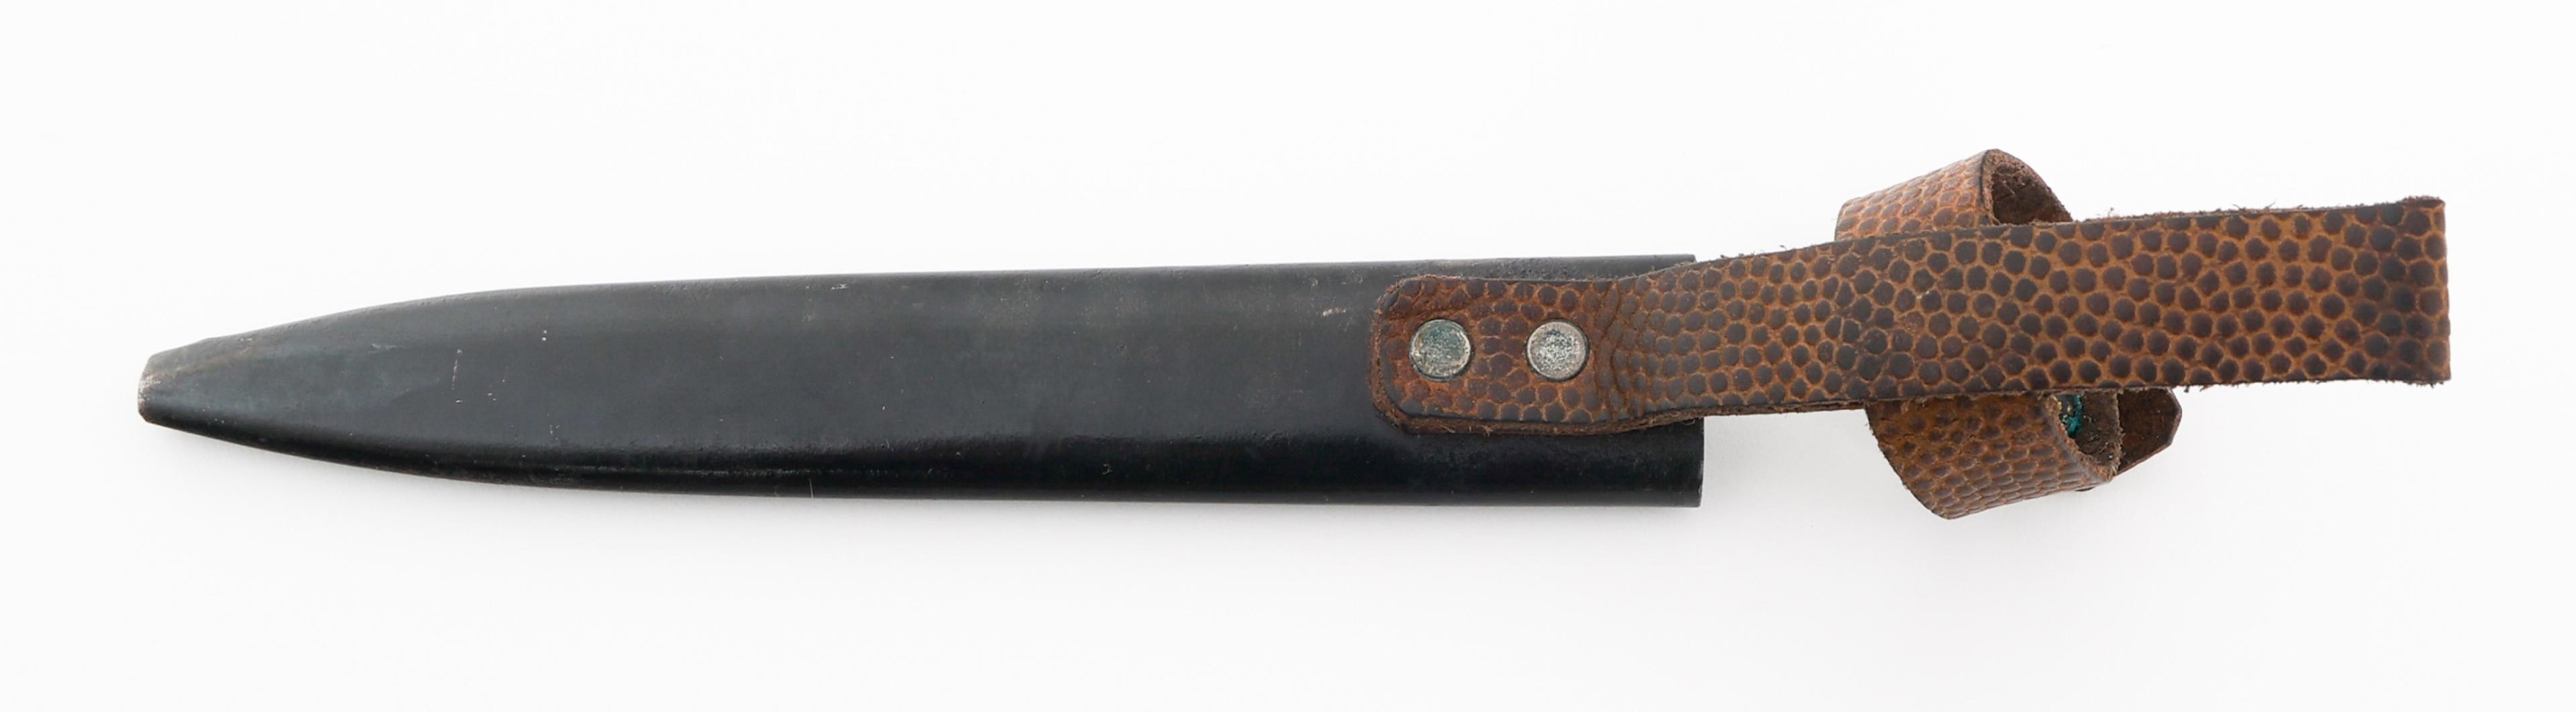 WWII GERMAN BOOT KNIFE by WKC WITH SCABBARD